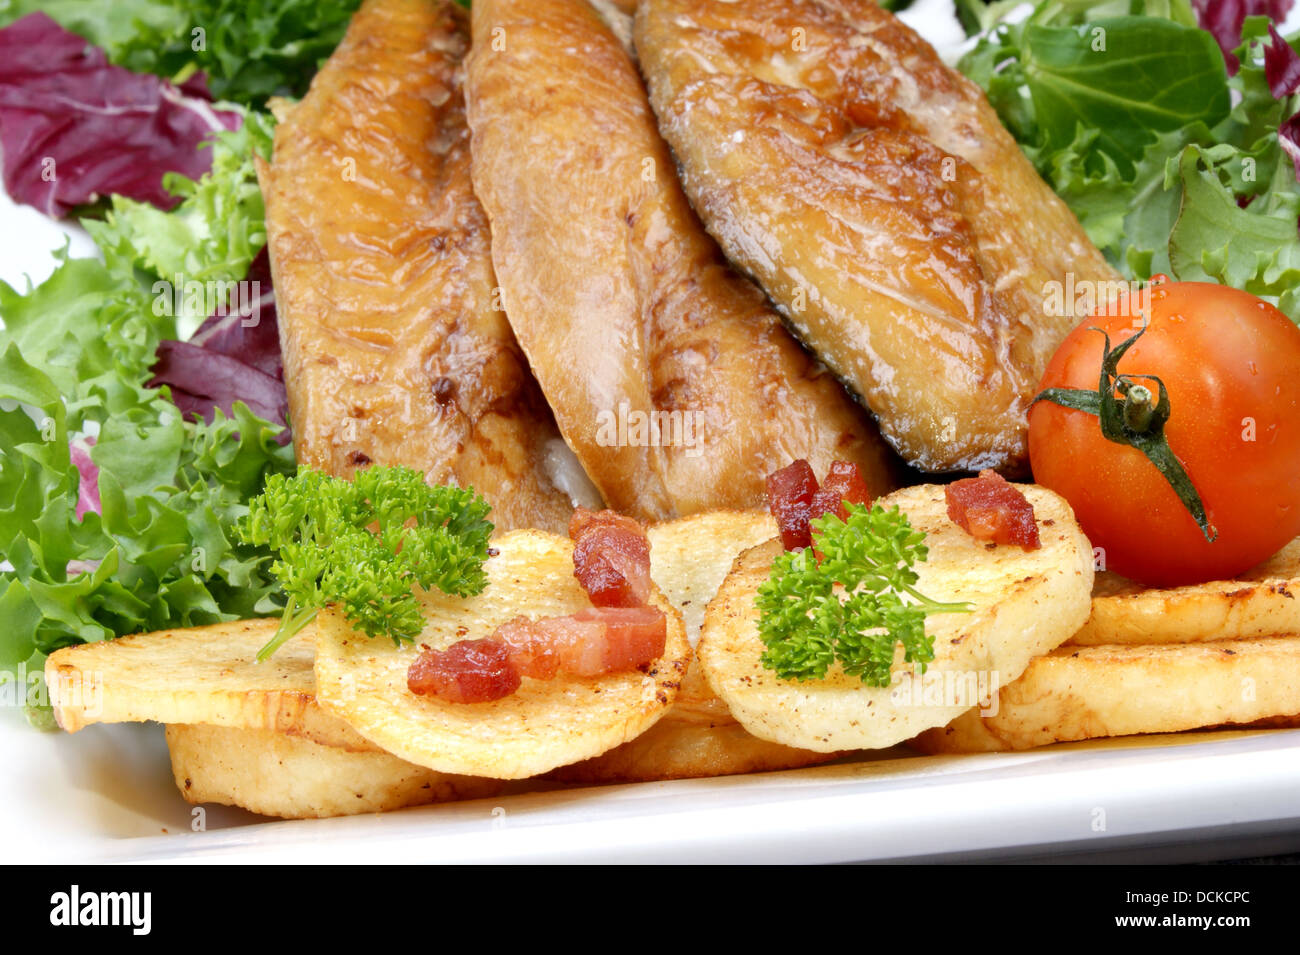 smoked mackerel fillets with fried potatoes and tomato Stock Photo